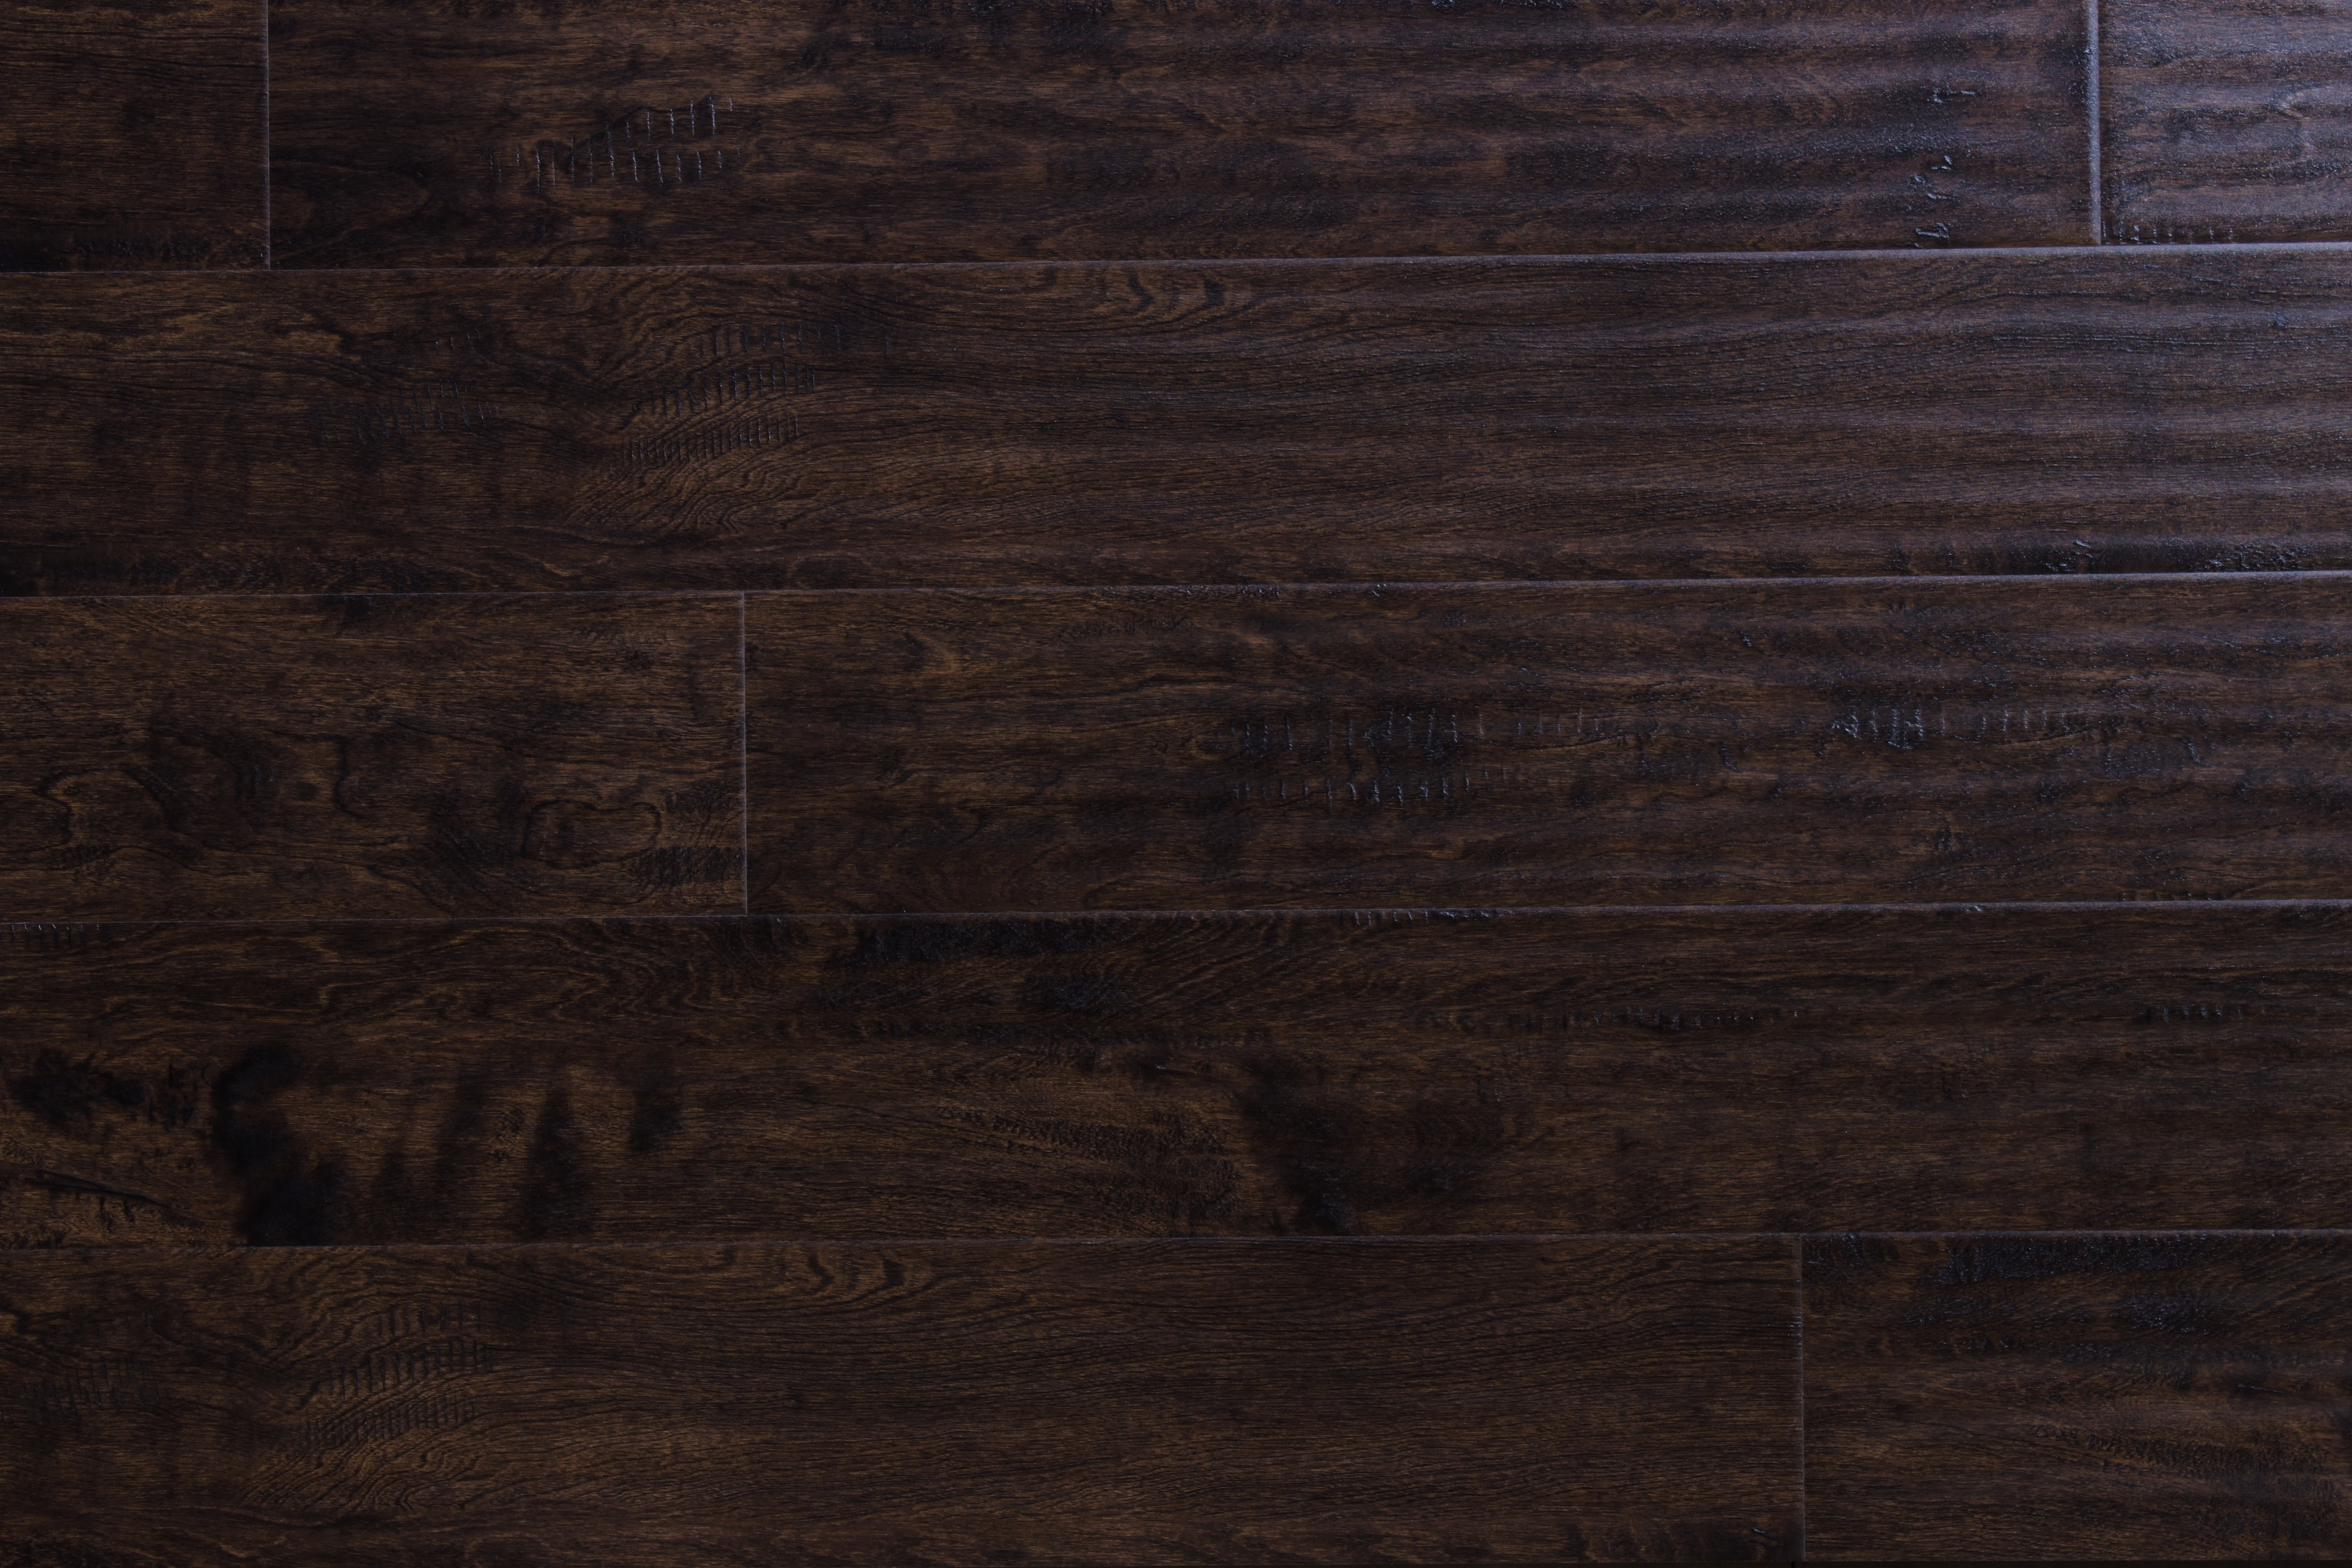 11 Awesome Hardwood Floor Cost Per Sq Foot 2024 free download hardwood floor cost per sq foot of wood flooring free samples available at builddirecta for tailor multi gb 5874277bb8d3c